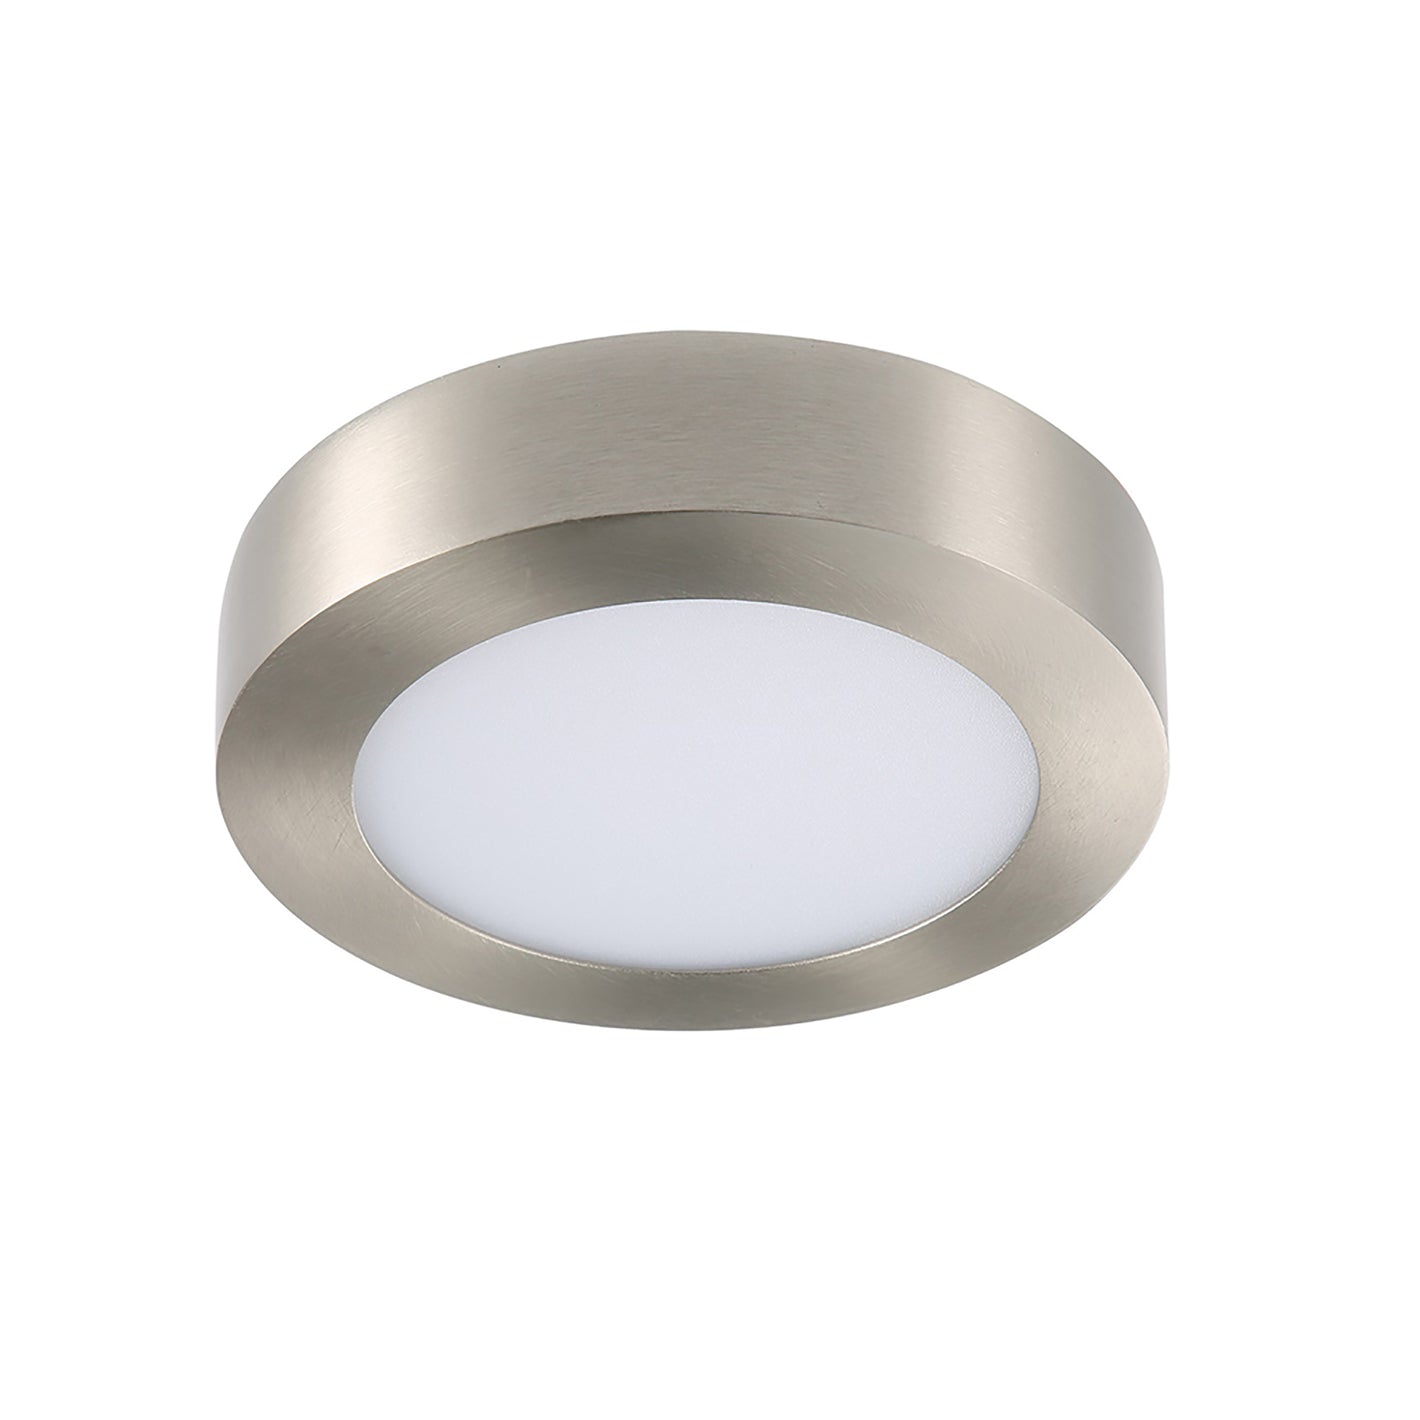 7 Inch 5CCT Color Selectable Surface Mount Panel Light Fixture, Brush Nickel Finish